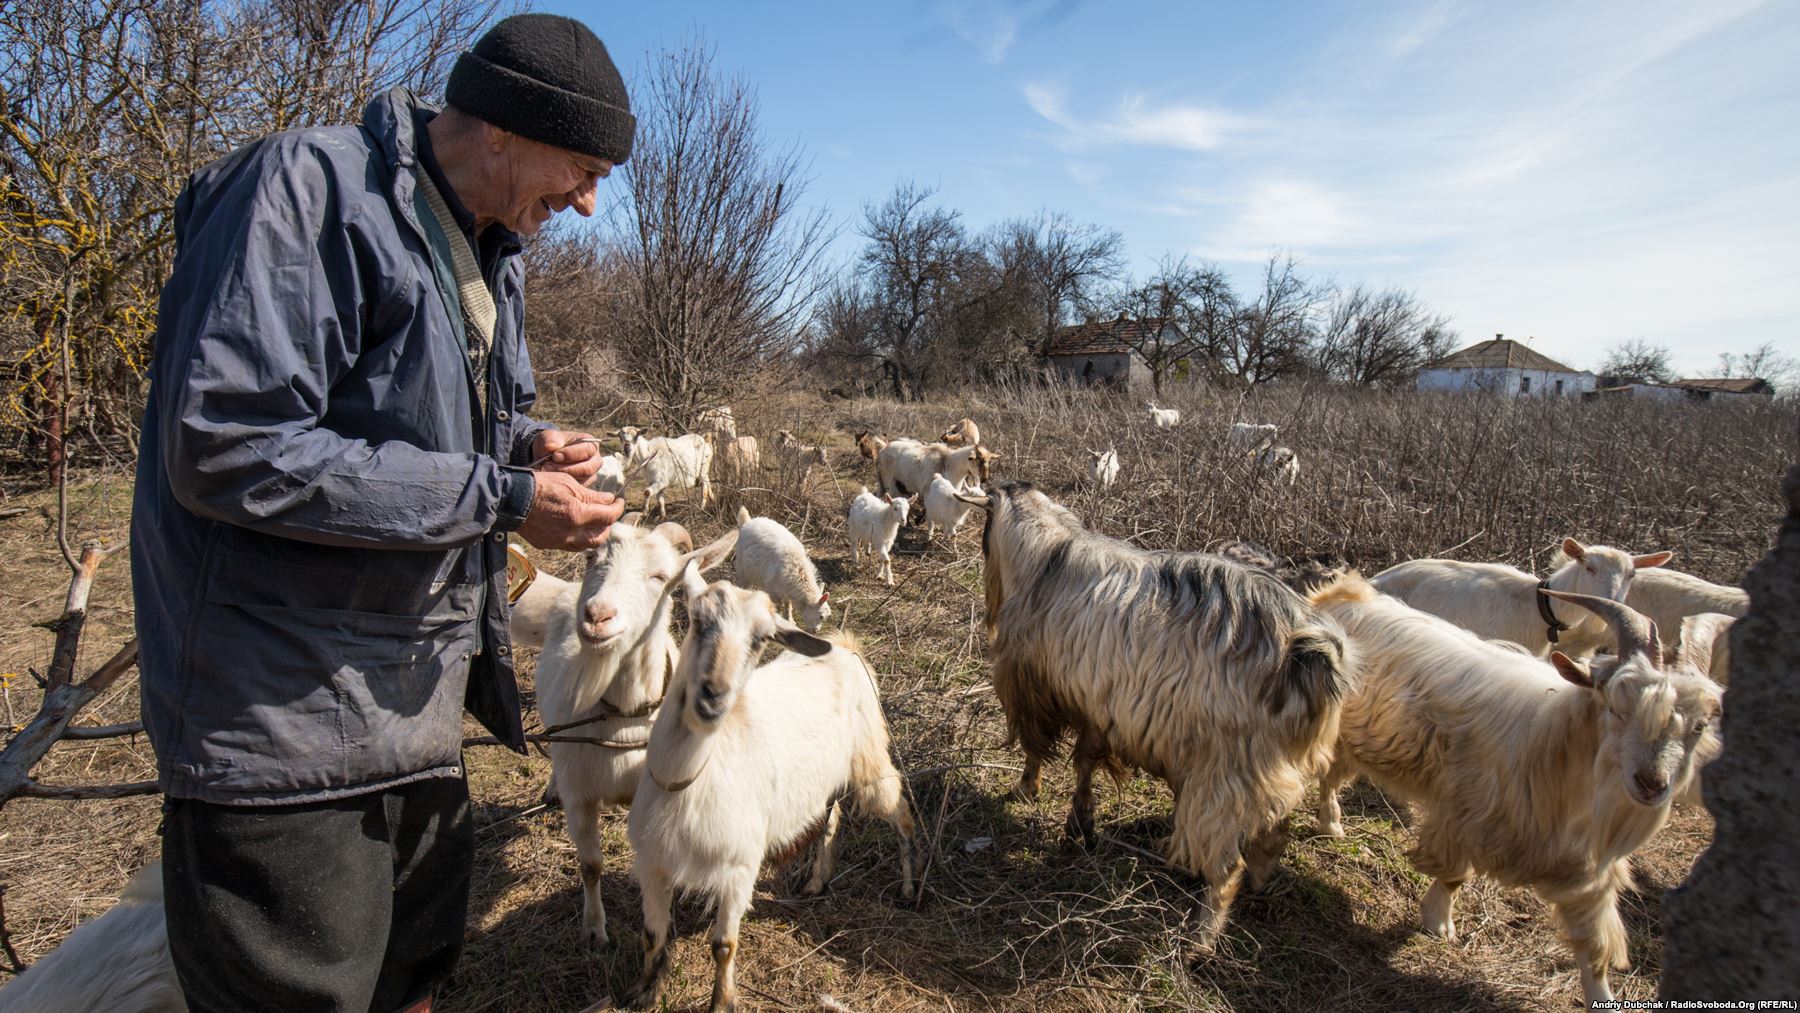 Mykola Ivanovych is one of 10 locals who opted to stay in the now militarized village. The 71-year-old looks after his 30 goats and sells milk mostly to Ukrainian soldiers. Photographer Dubchak says the goats remain highly sensitive to the fighting. "As soon as they hear shooting they run in the opposite direction." The flock has also been known to influence the fighting by clustering around concealed Ukrainian sniper positions, braying for food. "As a result the sniper has to change his firing position" Dubchak says. 